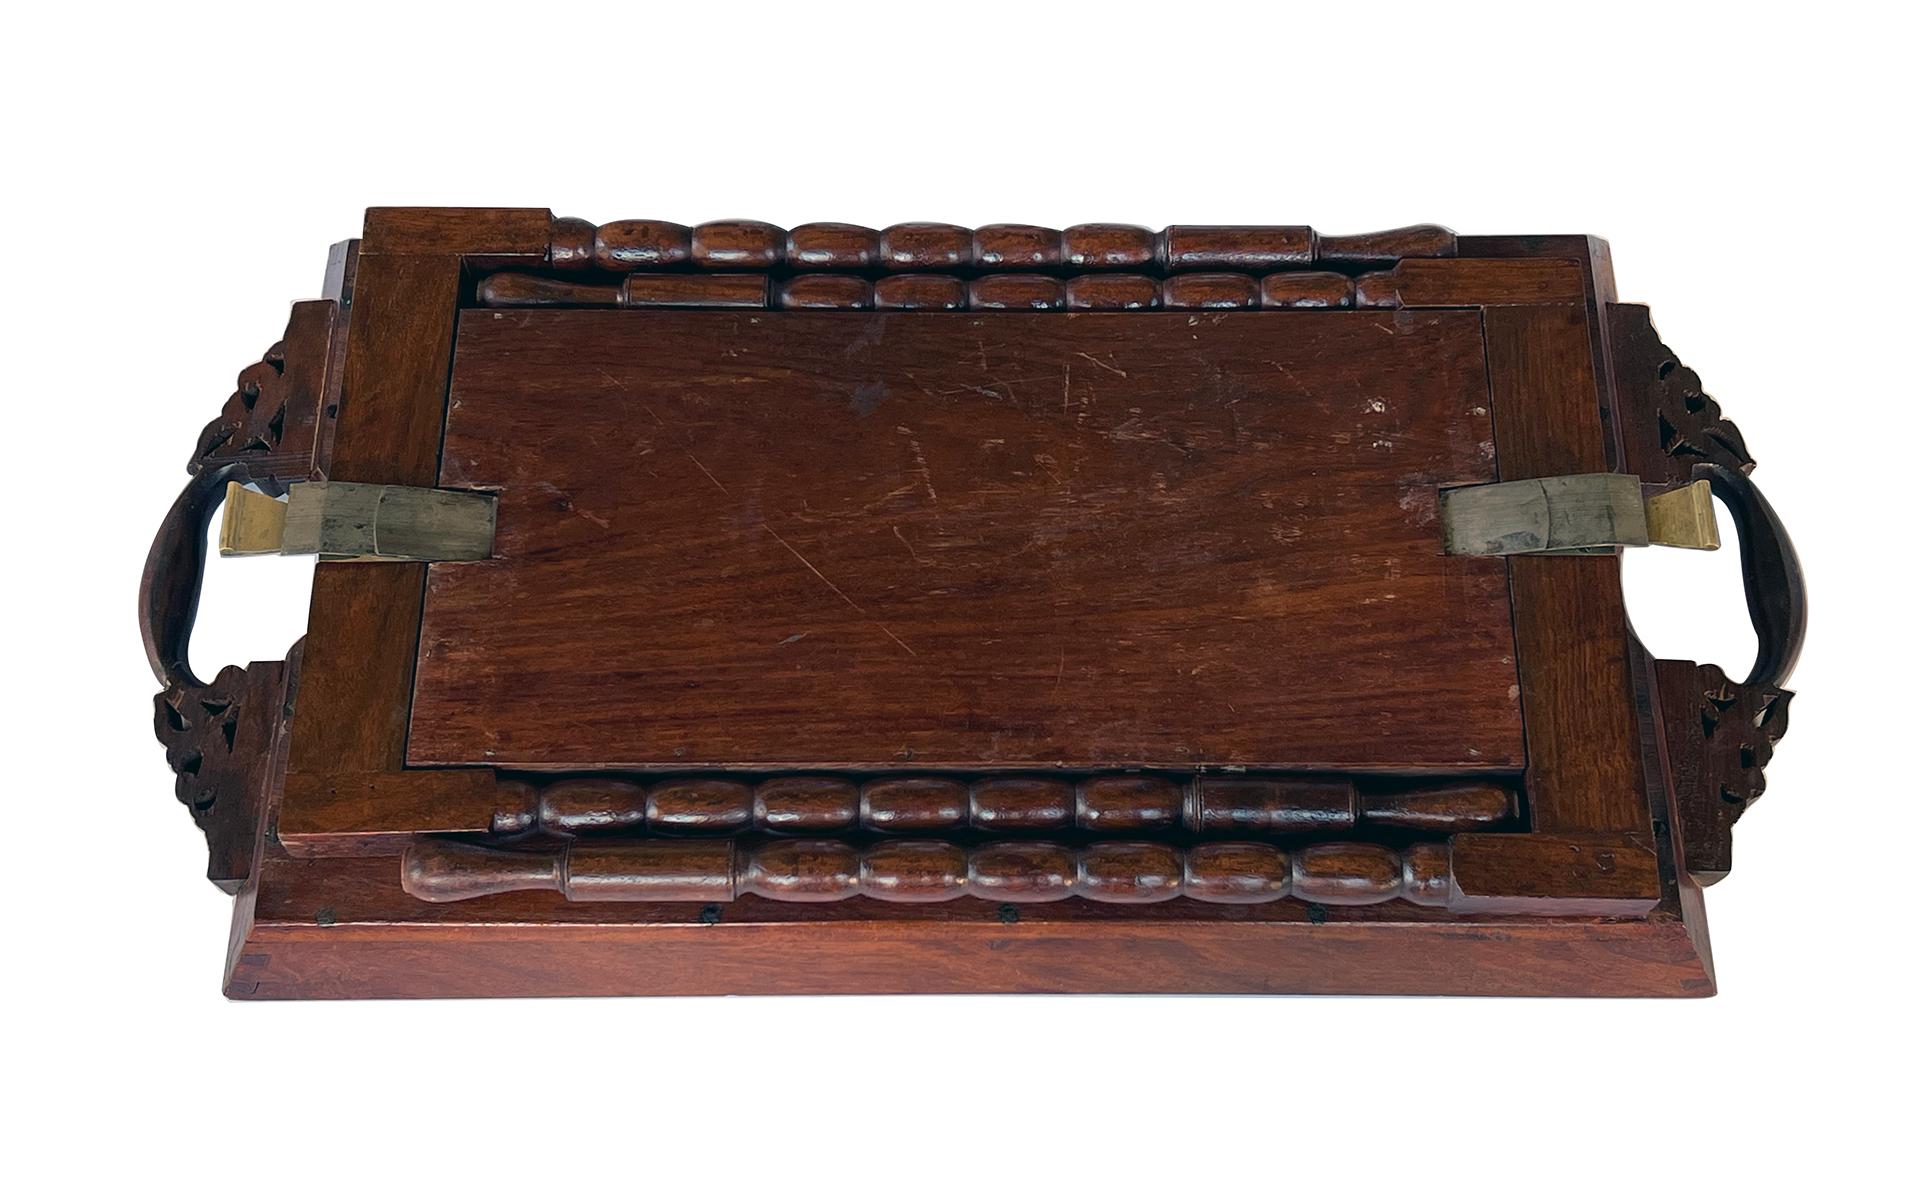 British Indian Ocean Territory Anglo Indian Butlers-Style Inlaid Wooden Traveling Table Depicting Taj Mahal